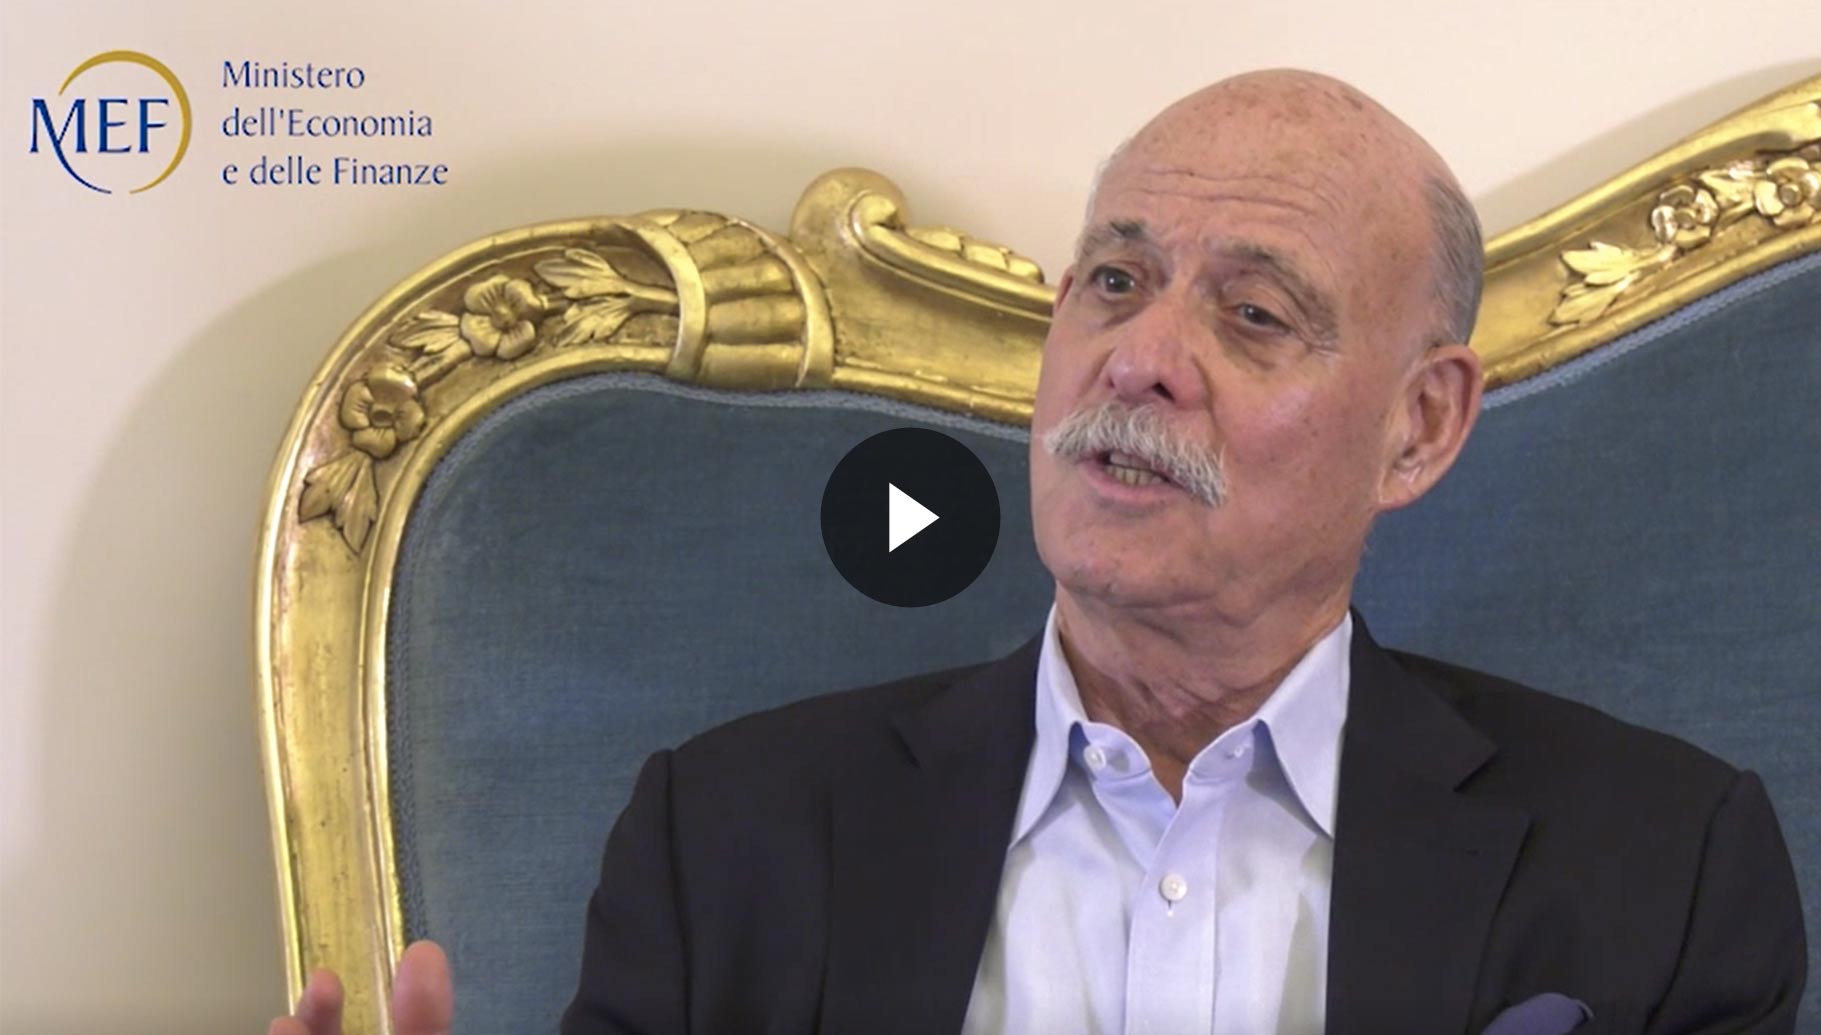 Interview with economist Jeremy Rifkin on the MEF YouTube channel